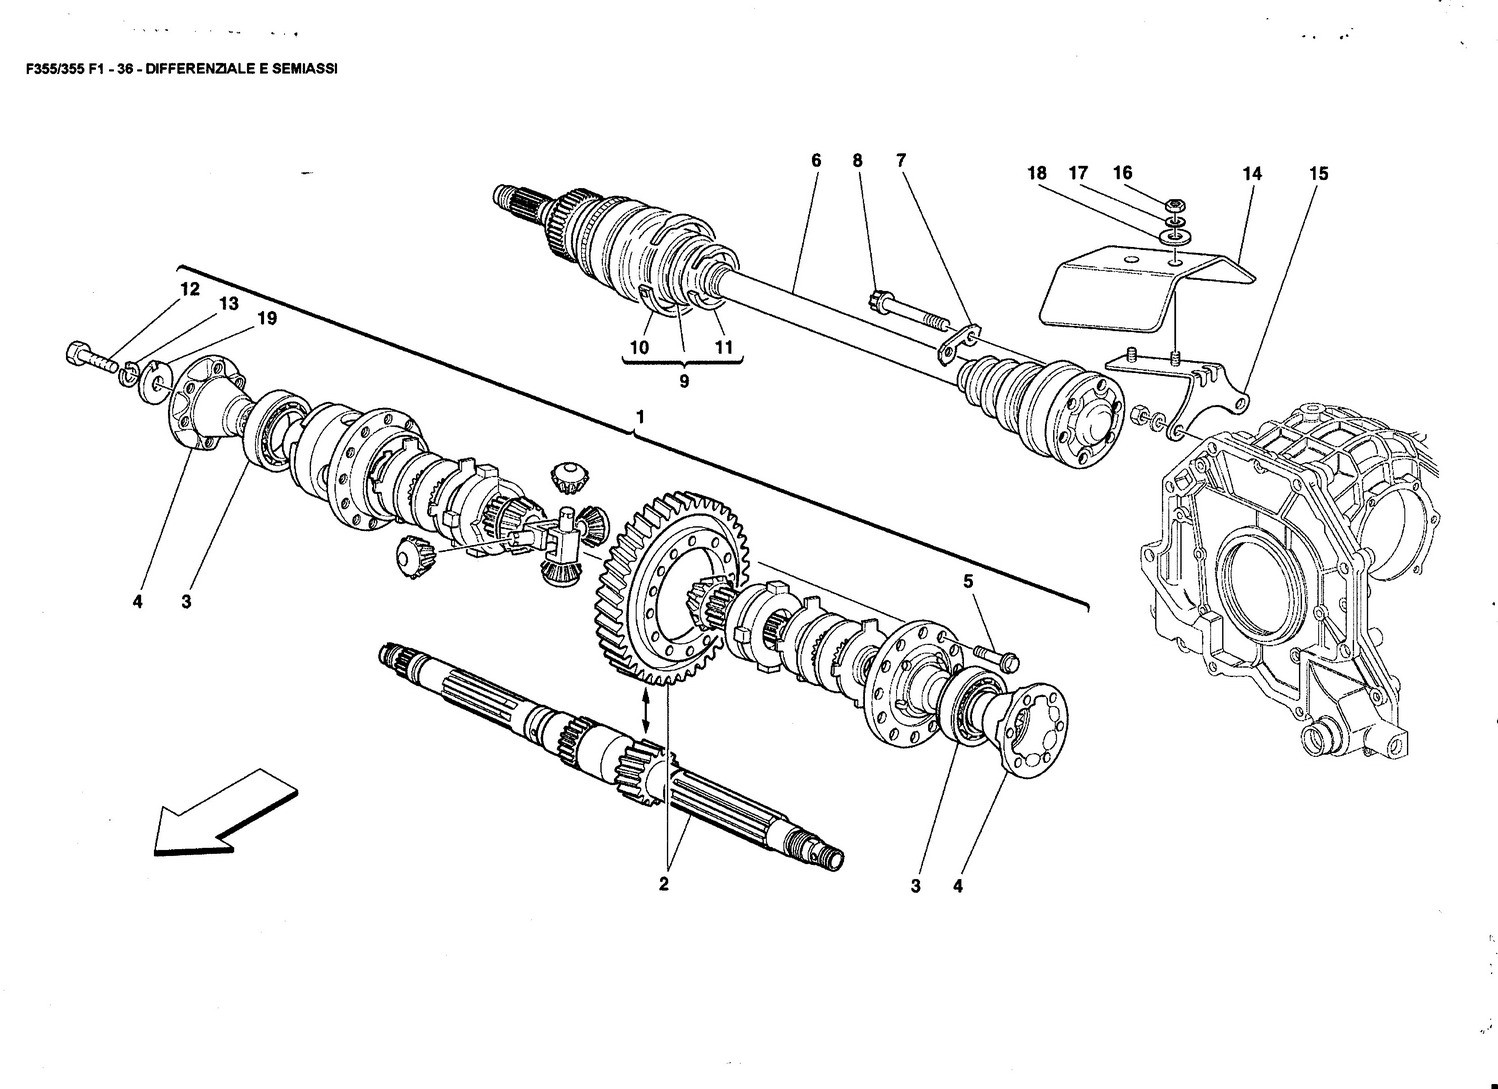 DIFFERENTIAL ANO AXLE SHAFTS